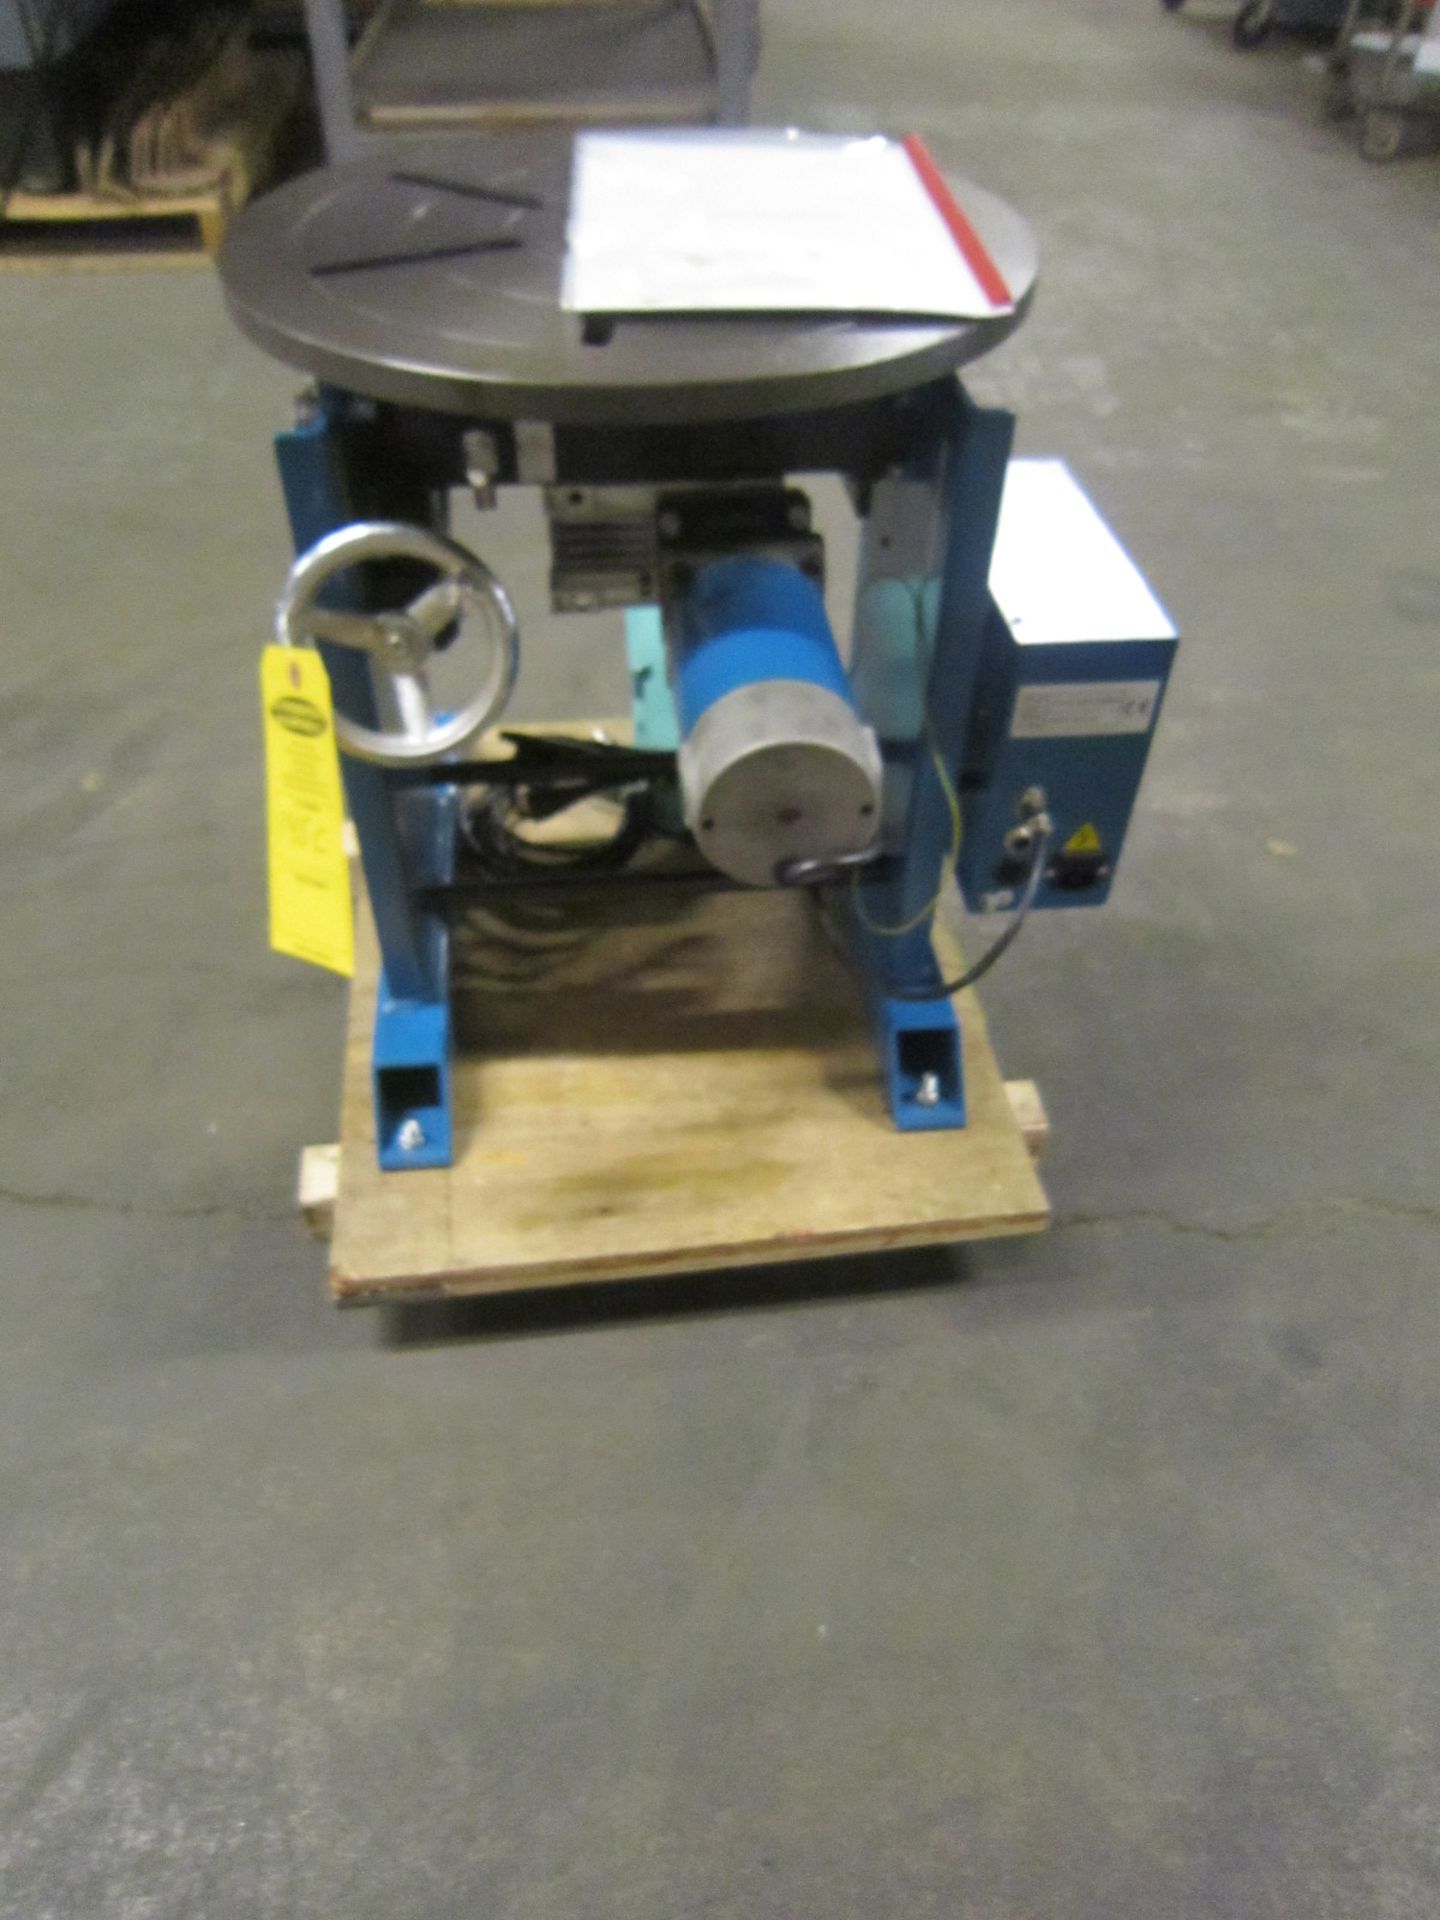 Verner model VD-700 WELDING POSITIONER 700lbs capacity - tilt and rotate with variable speed drive - Image 2 of 2